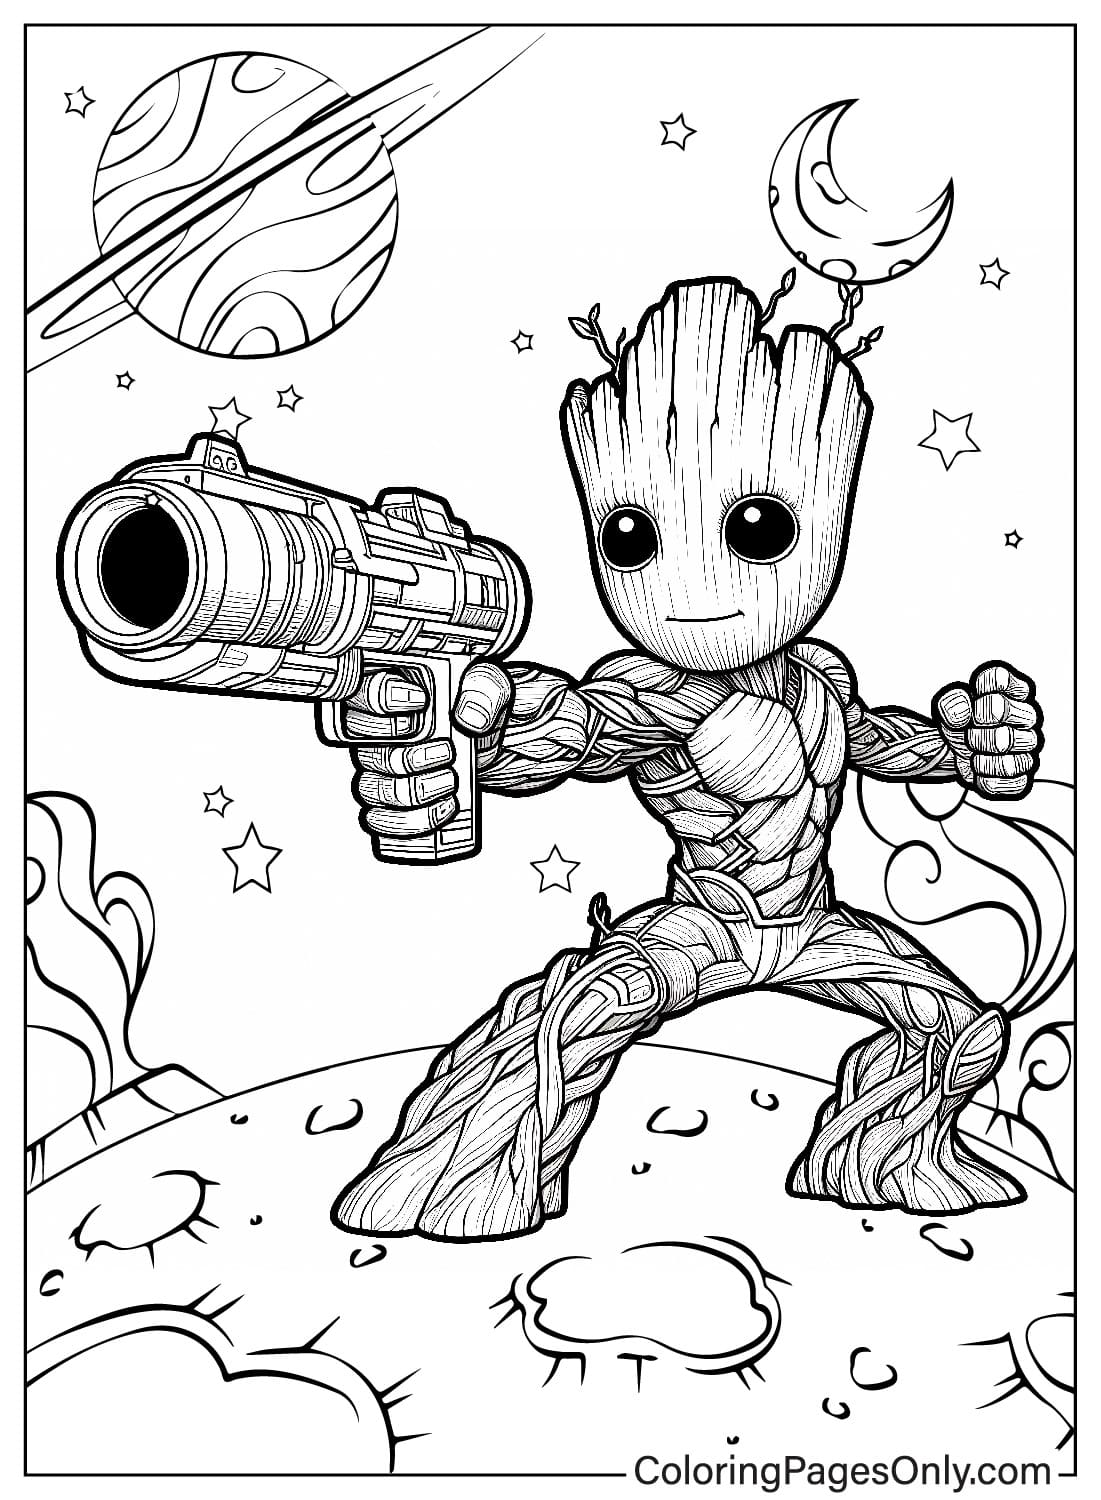 Fight Groot Coloring Page from Groot